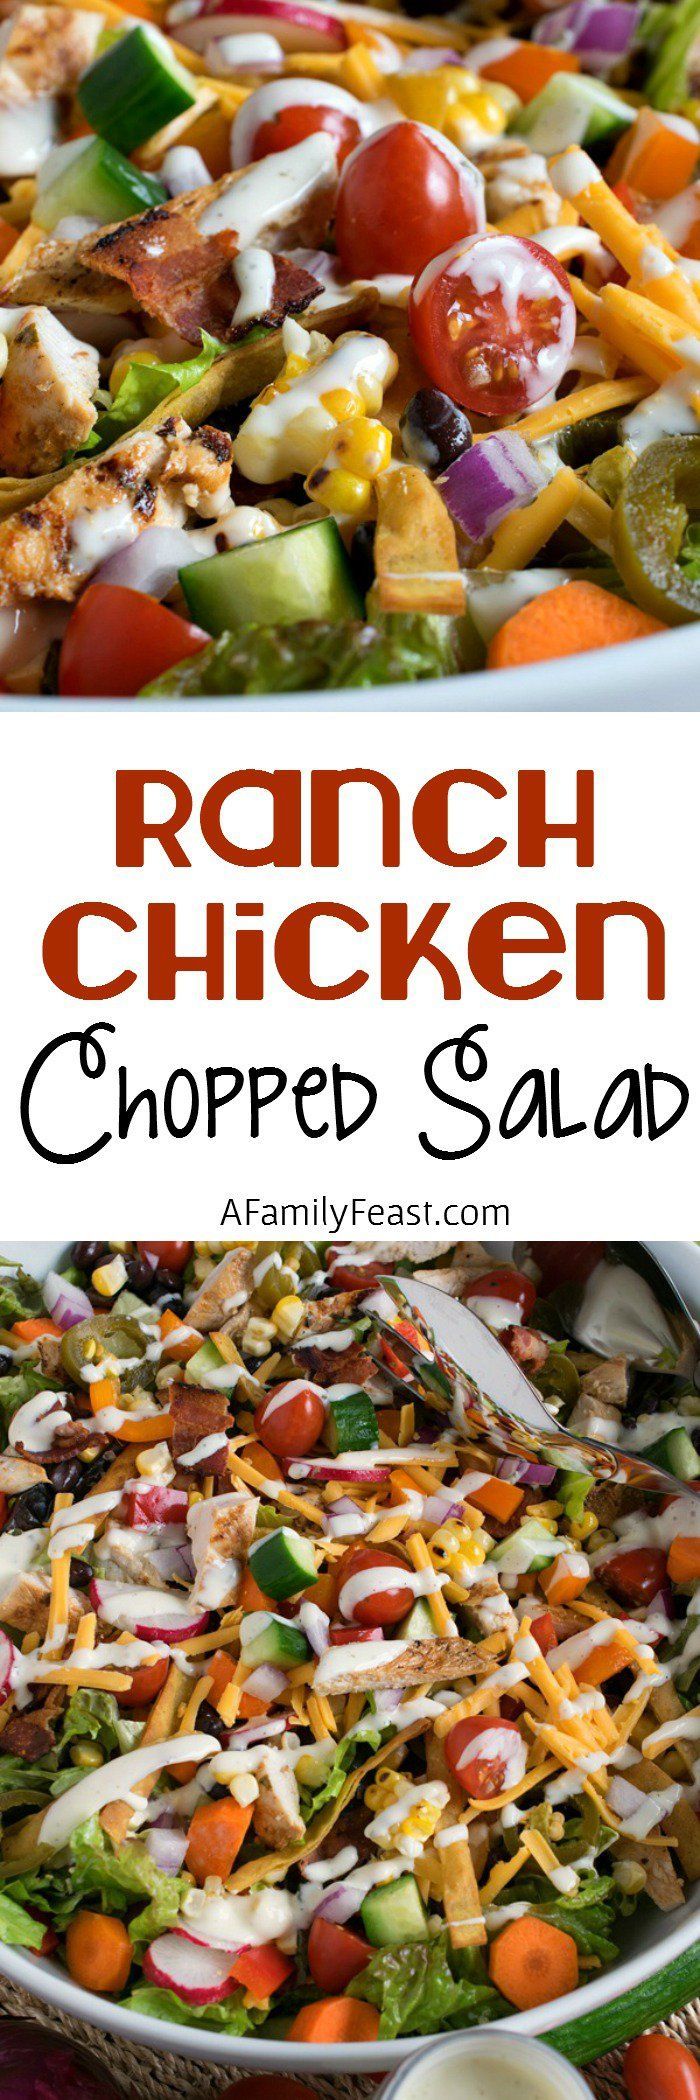 Ranch Chicken Chopped Salad – Grilled chicken, fresh veggies, tortilla strips and cheese – plus a delicious Ranch Dressing!